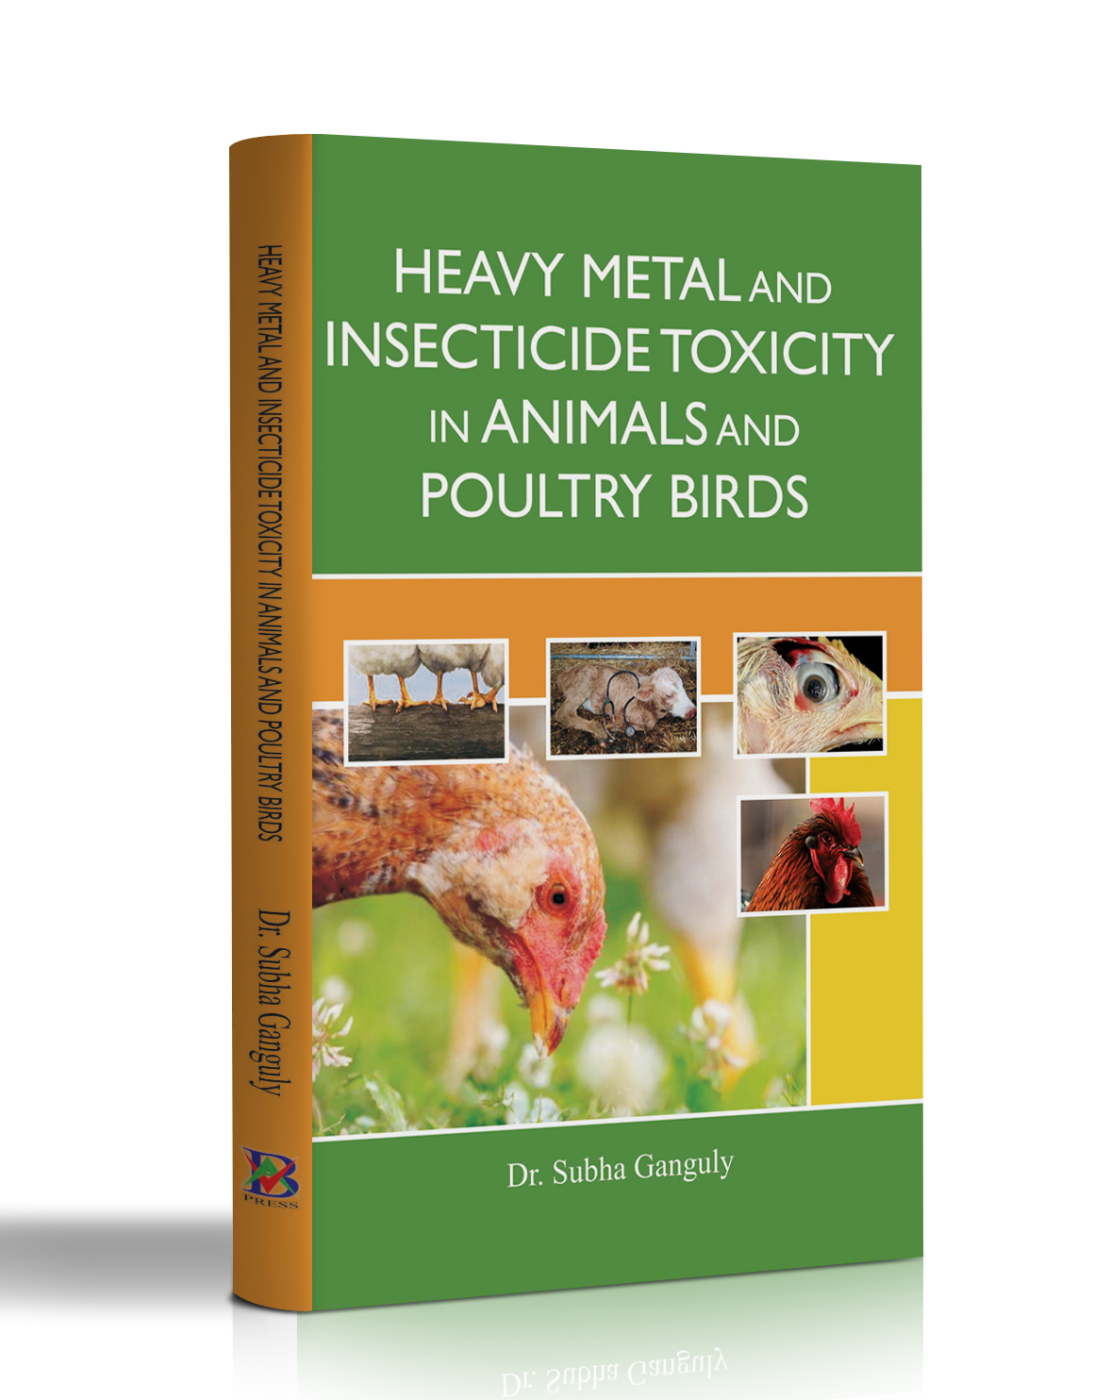 HEAVY METAL AND INSECTICIDE TOXICITY IN ANIMALS AND POULTRY BIRDS -  AgriBioVet Press